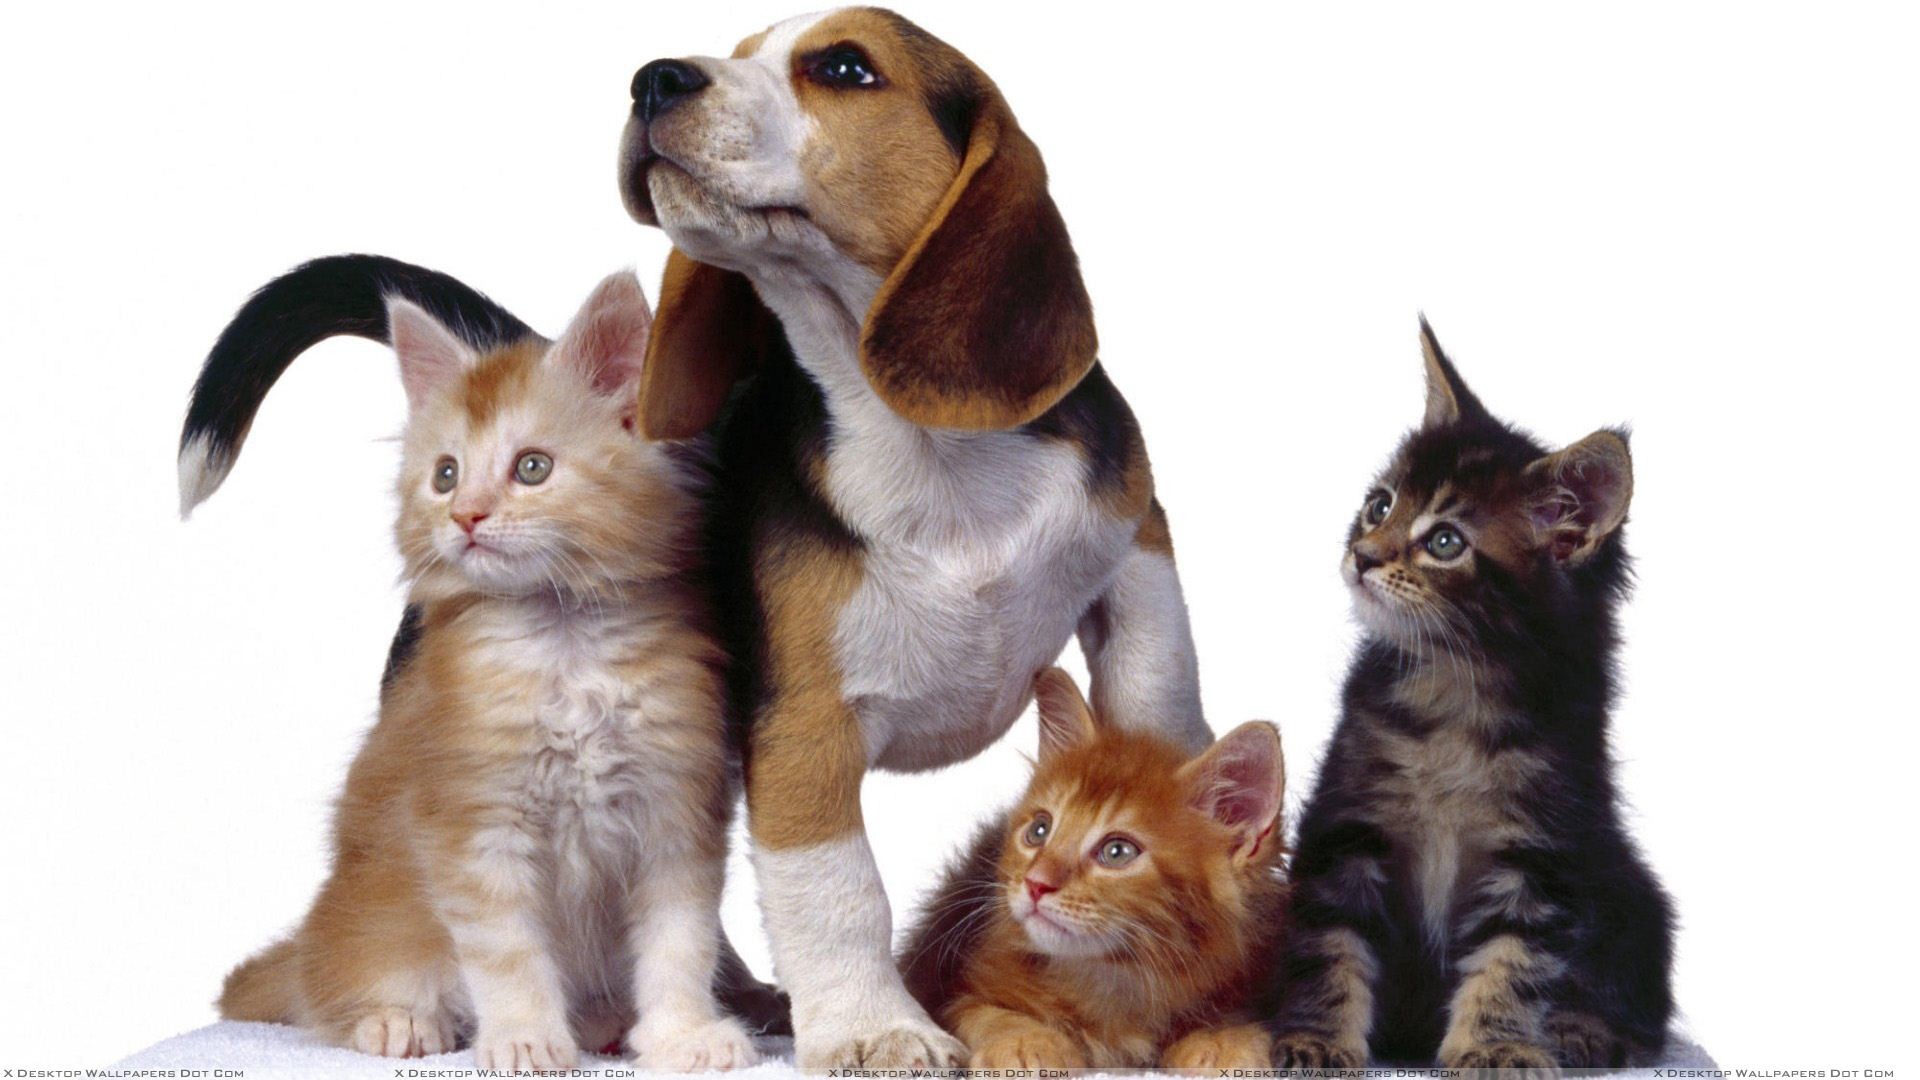 1920x1080 You are viewing wallpaper titled "3 Cats With Dog ...